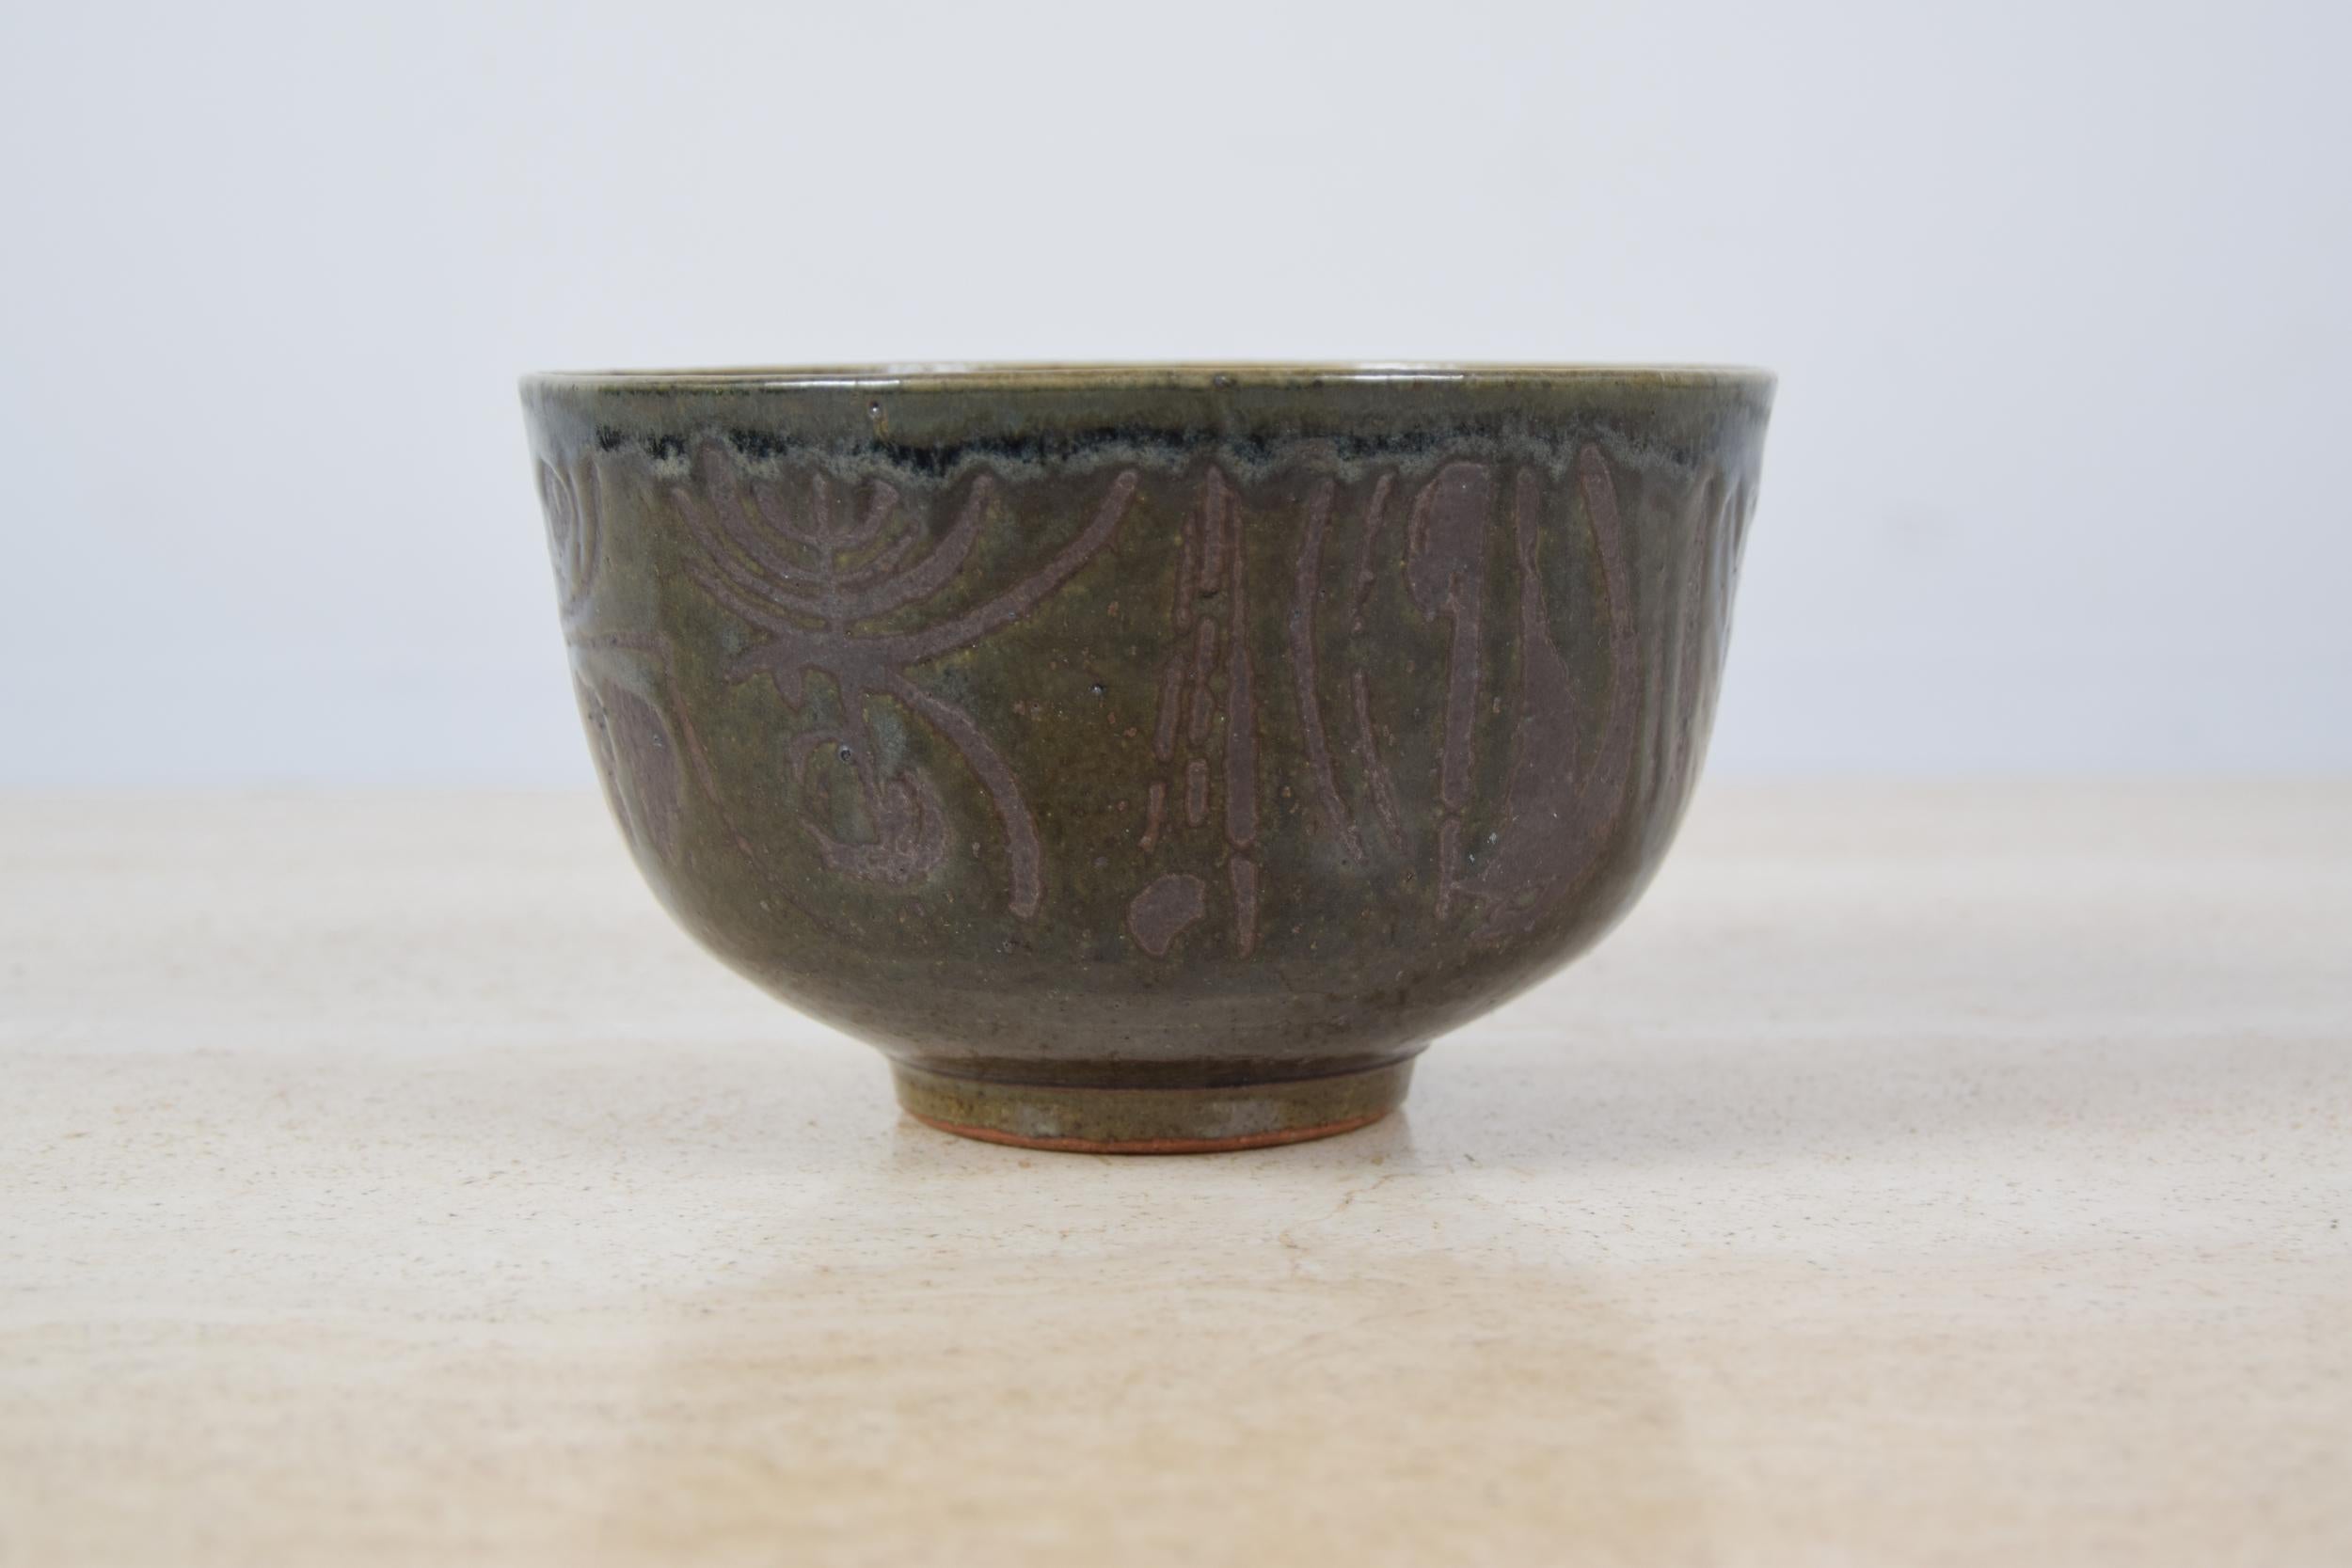 Studio pottery bowl by Gerry Williams, circa 1975. Bowl measures 7 1/2